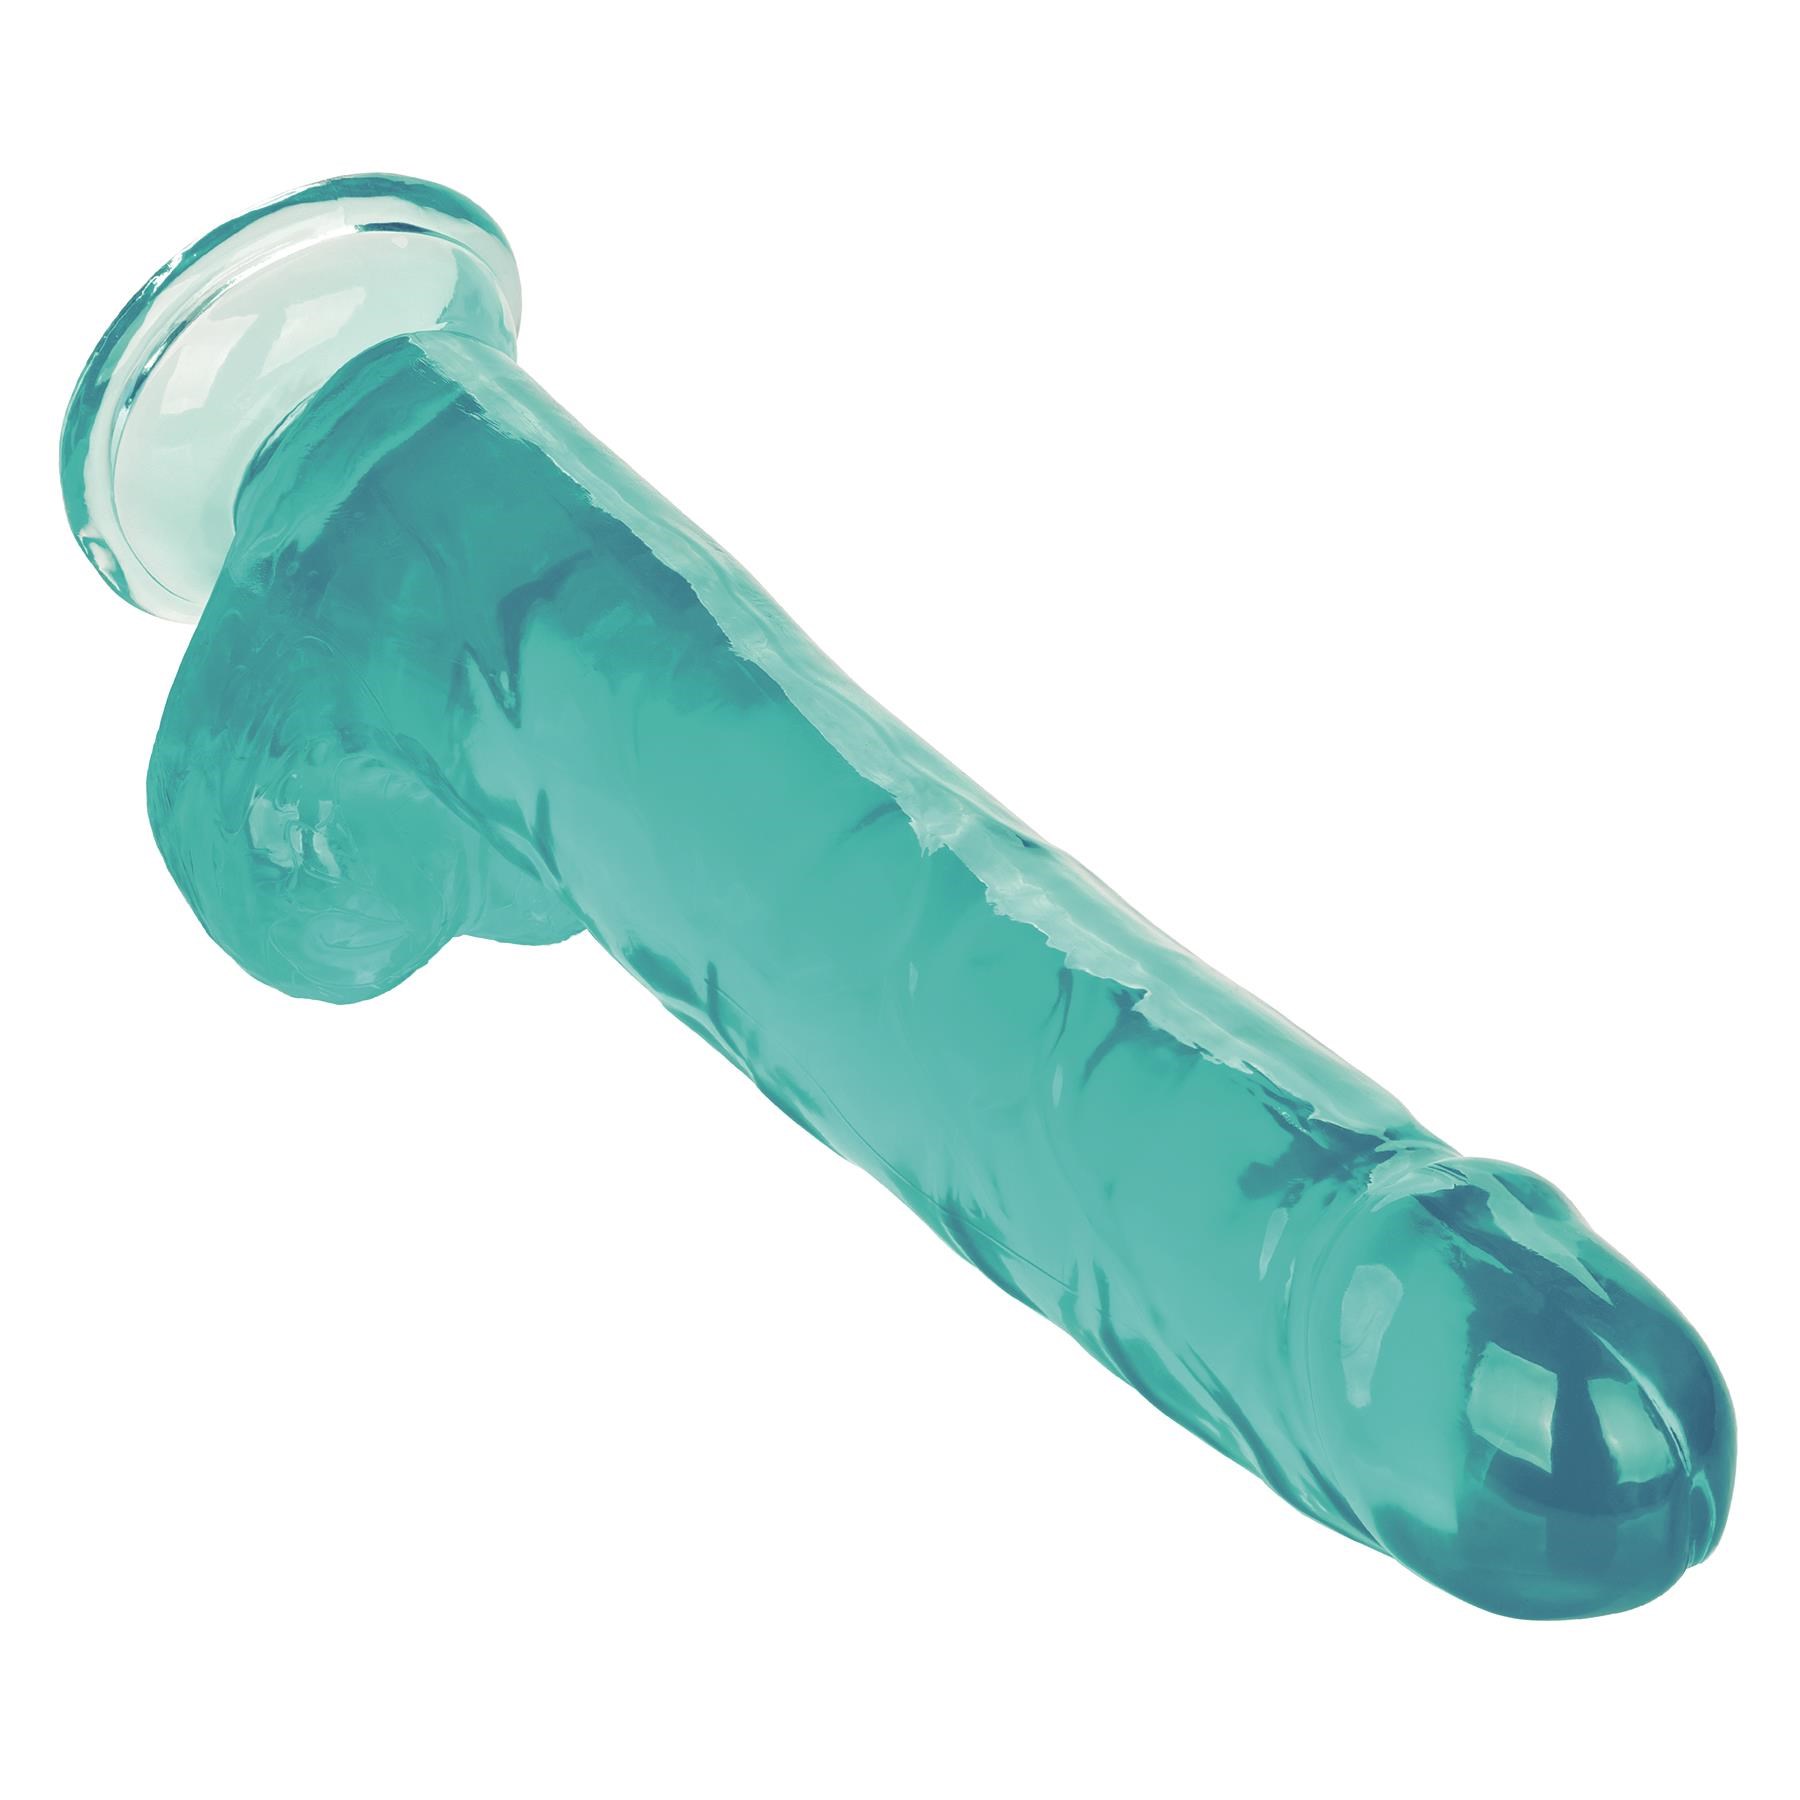 Size Queen 10 Inch Dildo Tip Pointing Downward - Blue